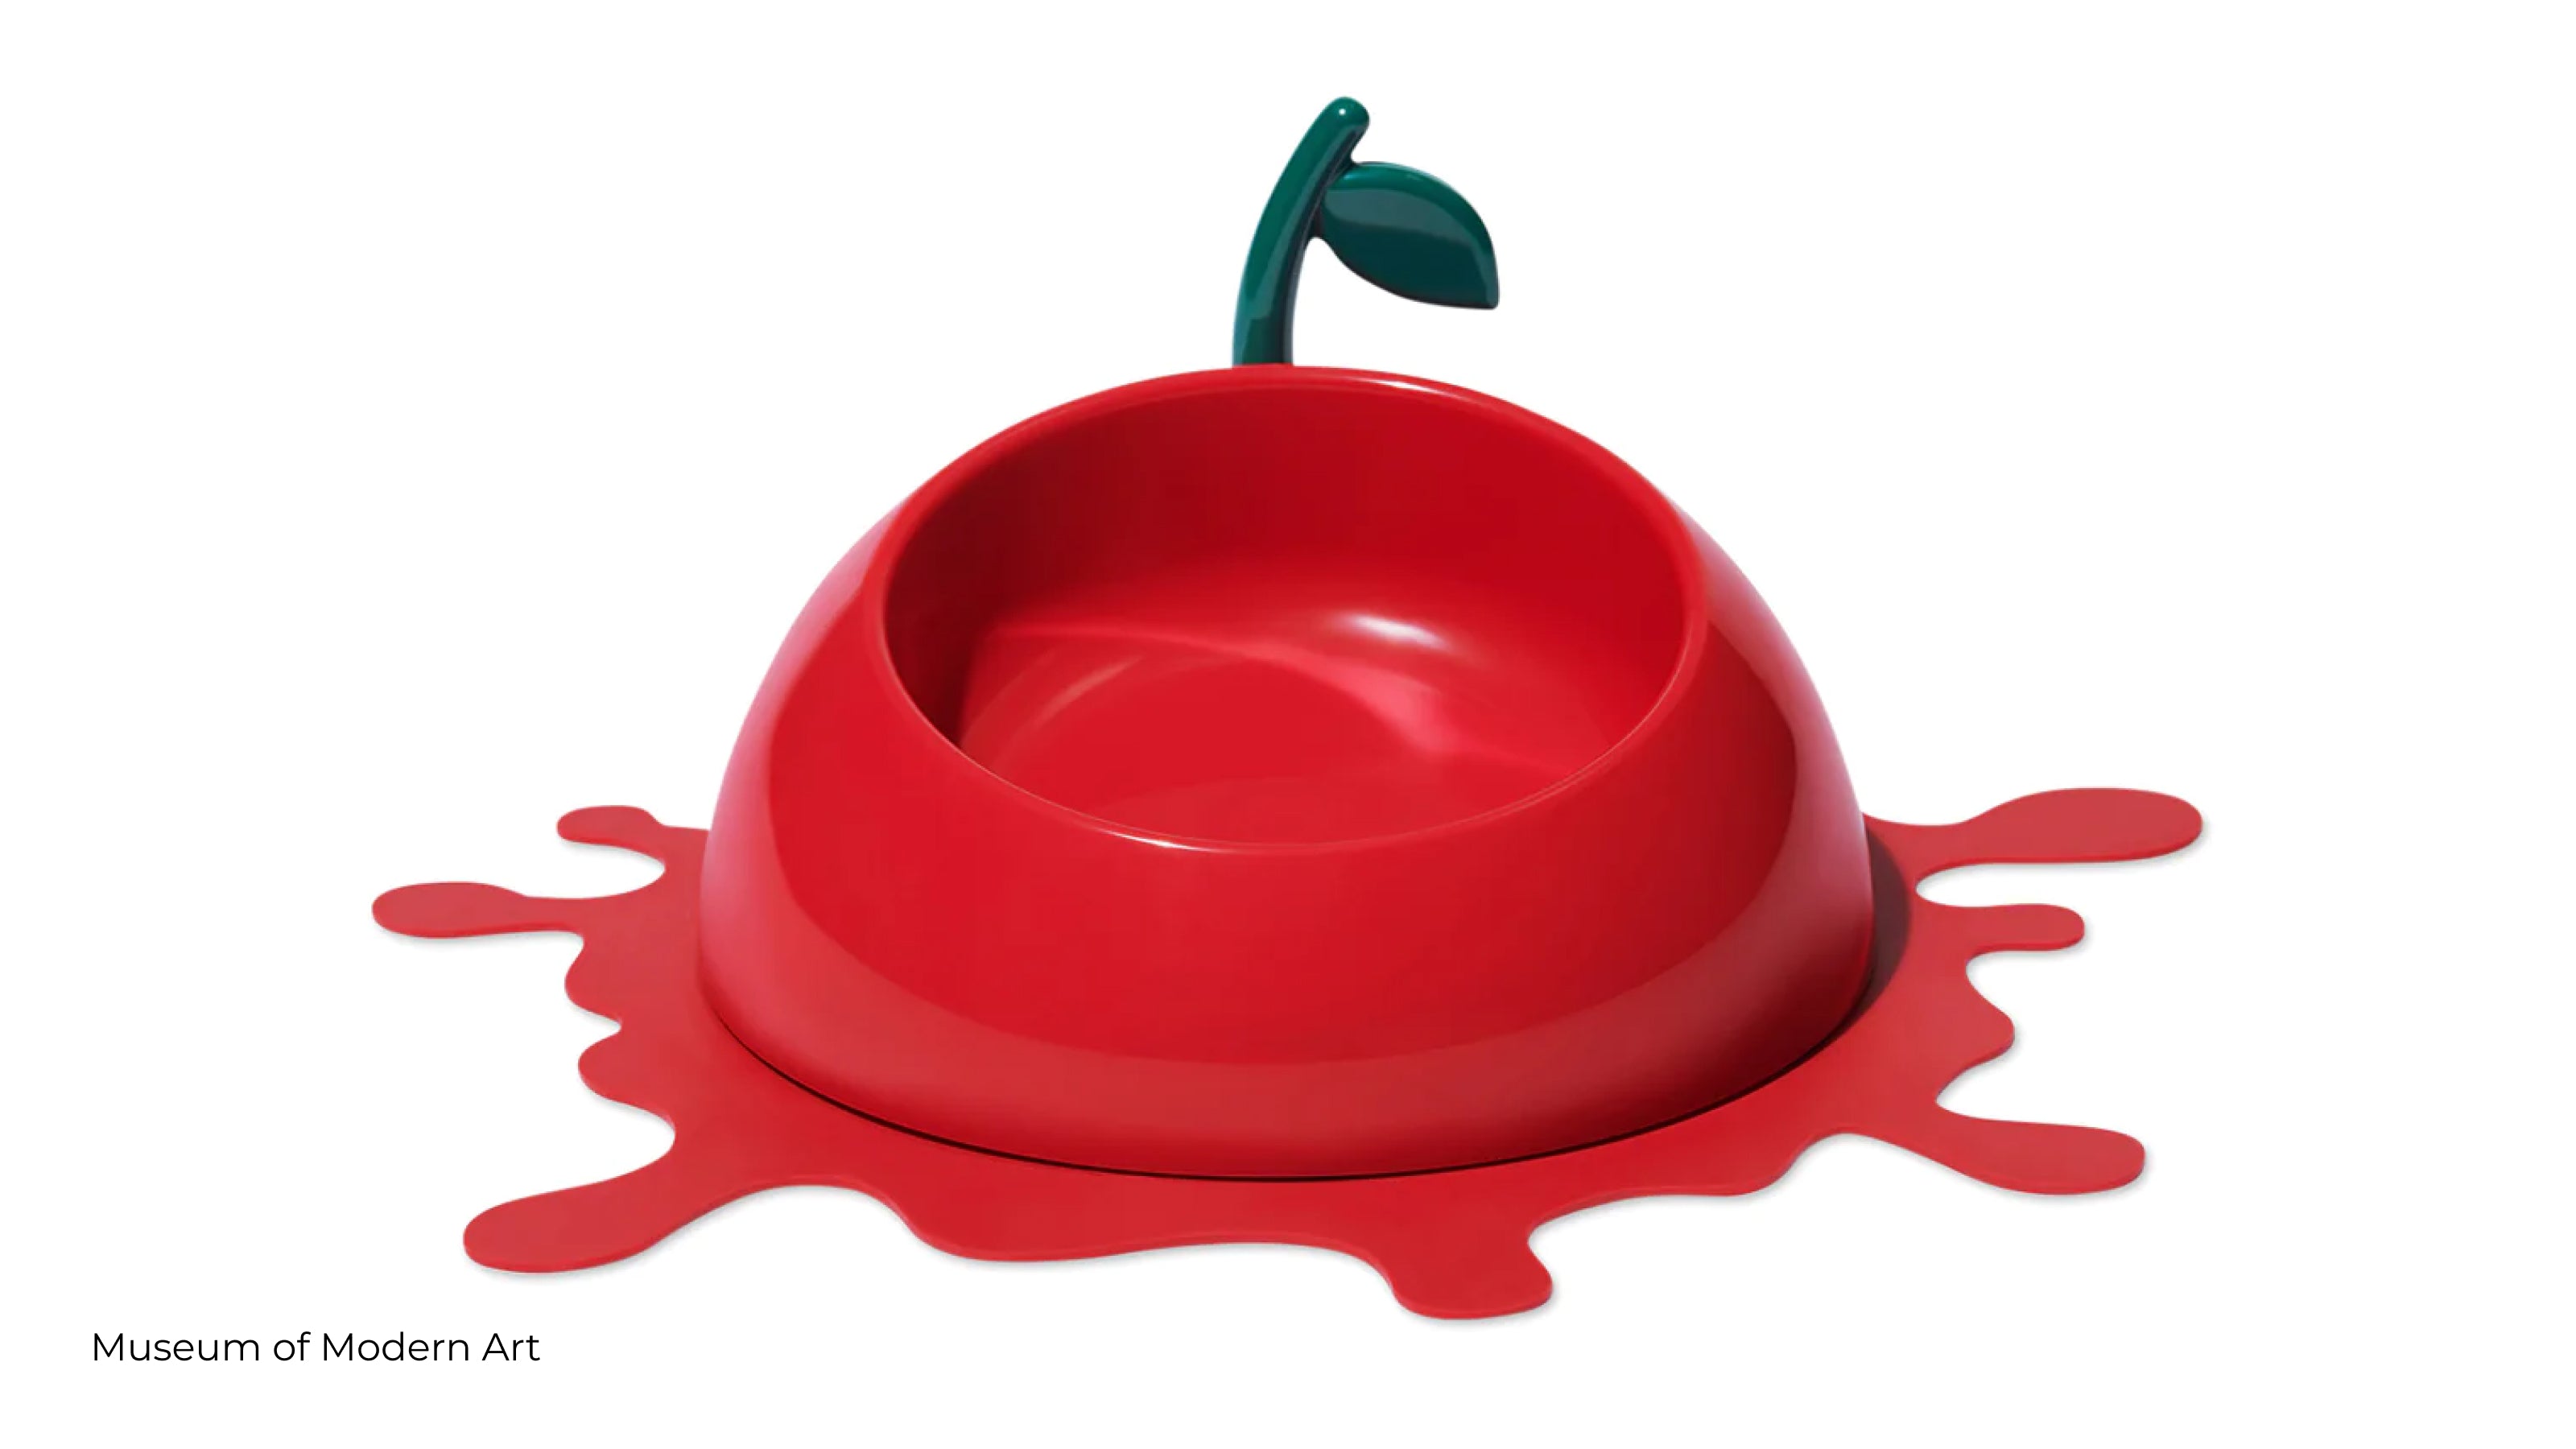 A red cherry pet bowl spoon and spill mat from the Museum of Modern Art